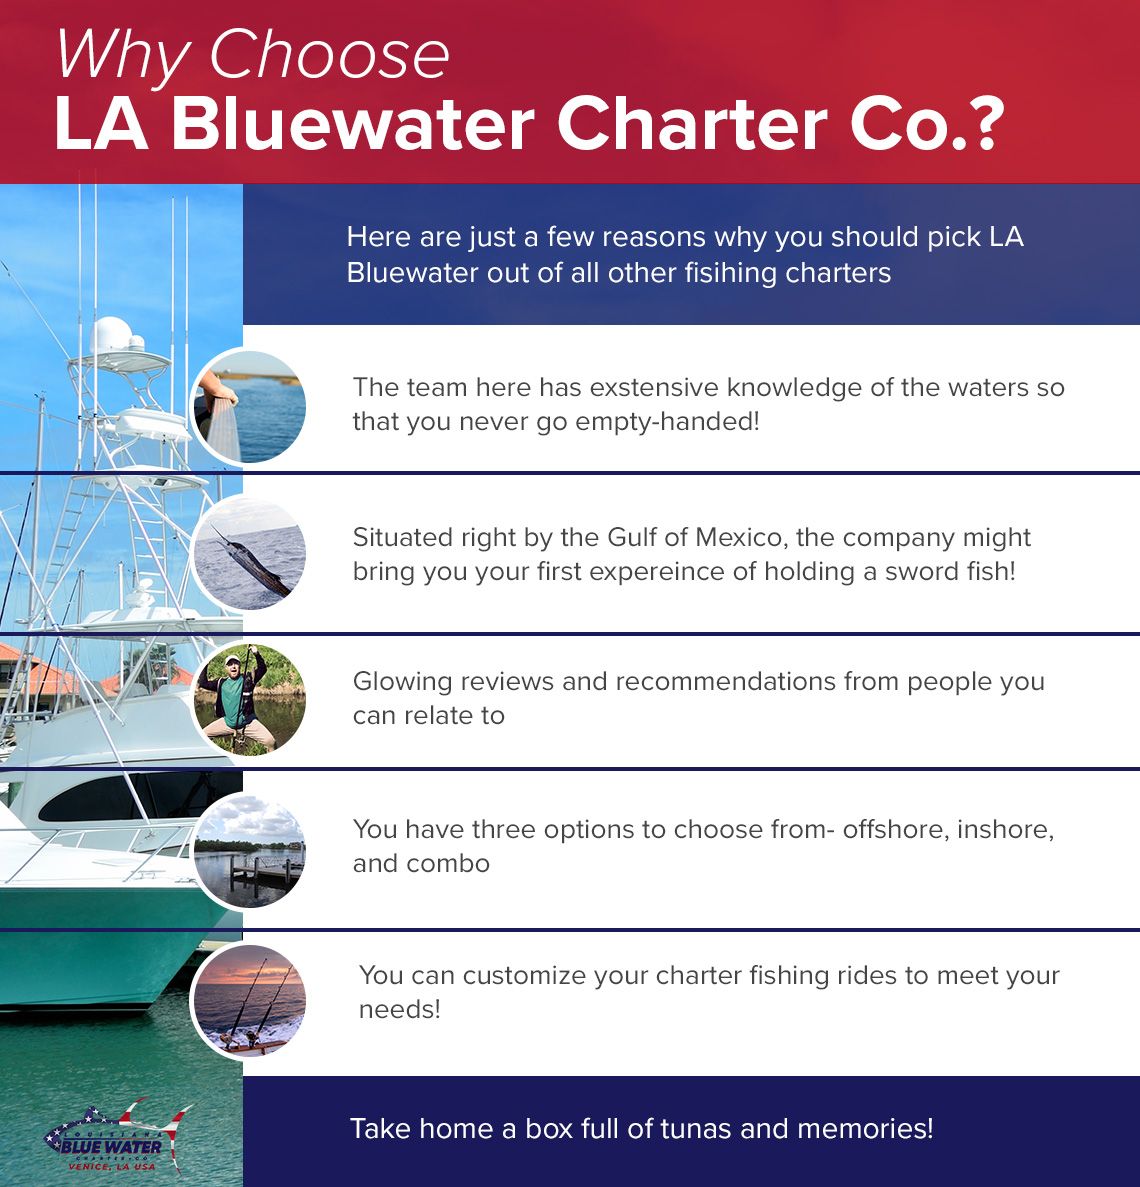 Infographic showing reasons to choose LA Bluewater Charter Co.